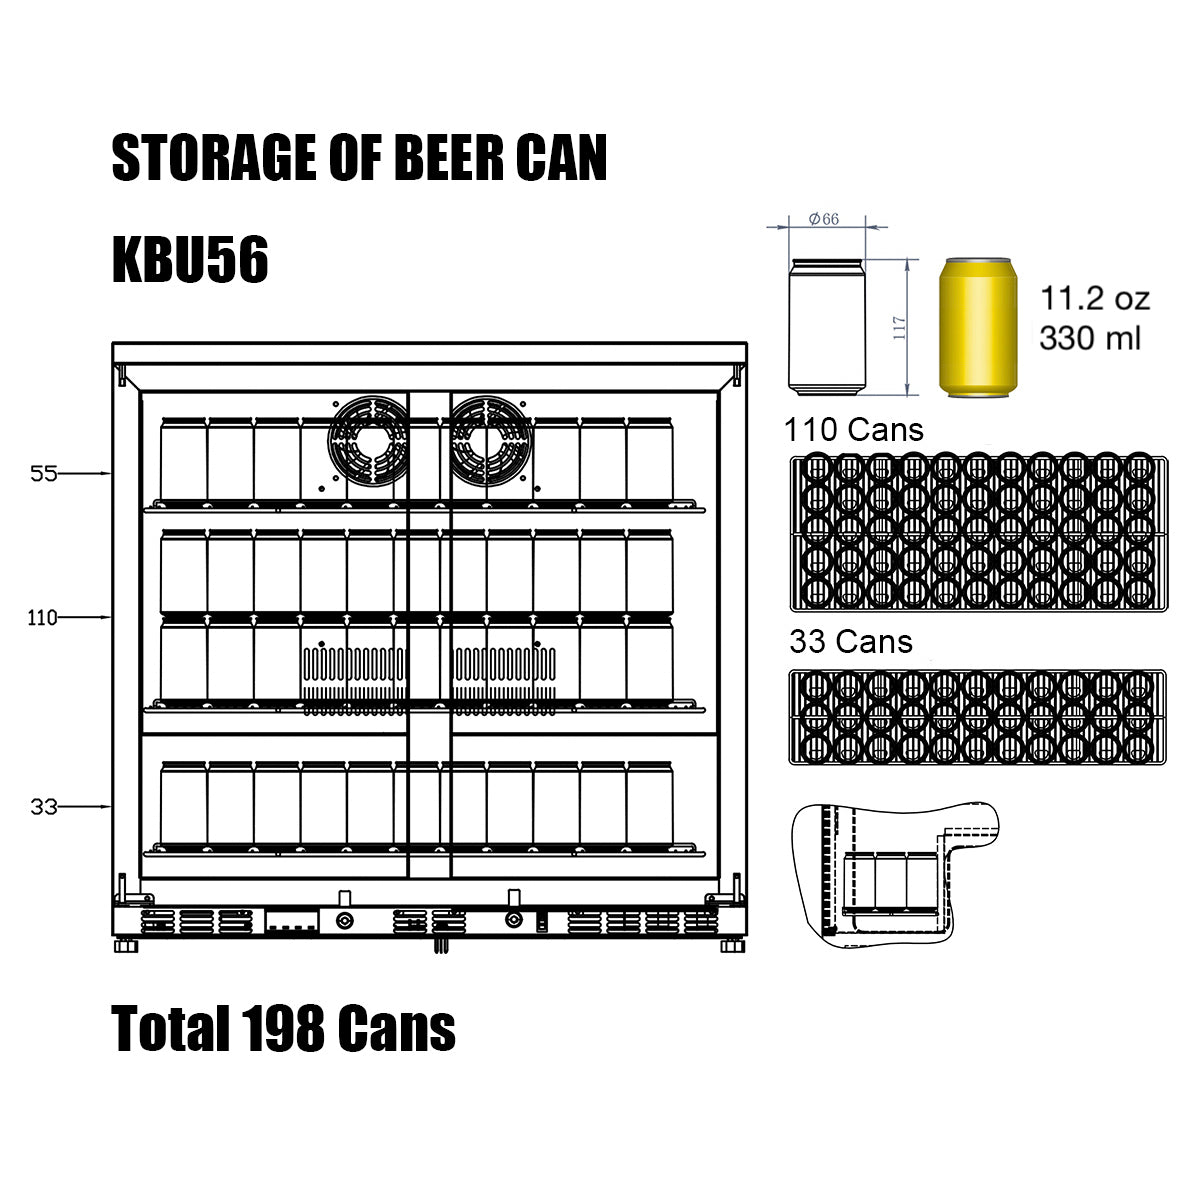 A black and white drawing of a Kings Bottle 36" Heating Glass 2 Door Built In Beverage Fridge with a beer can, machine, and logo.